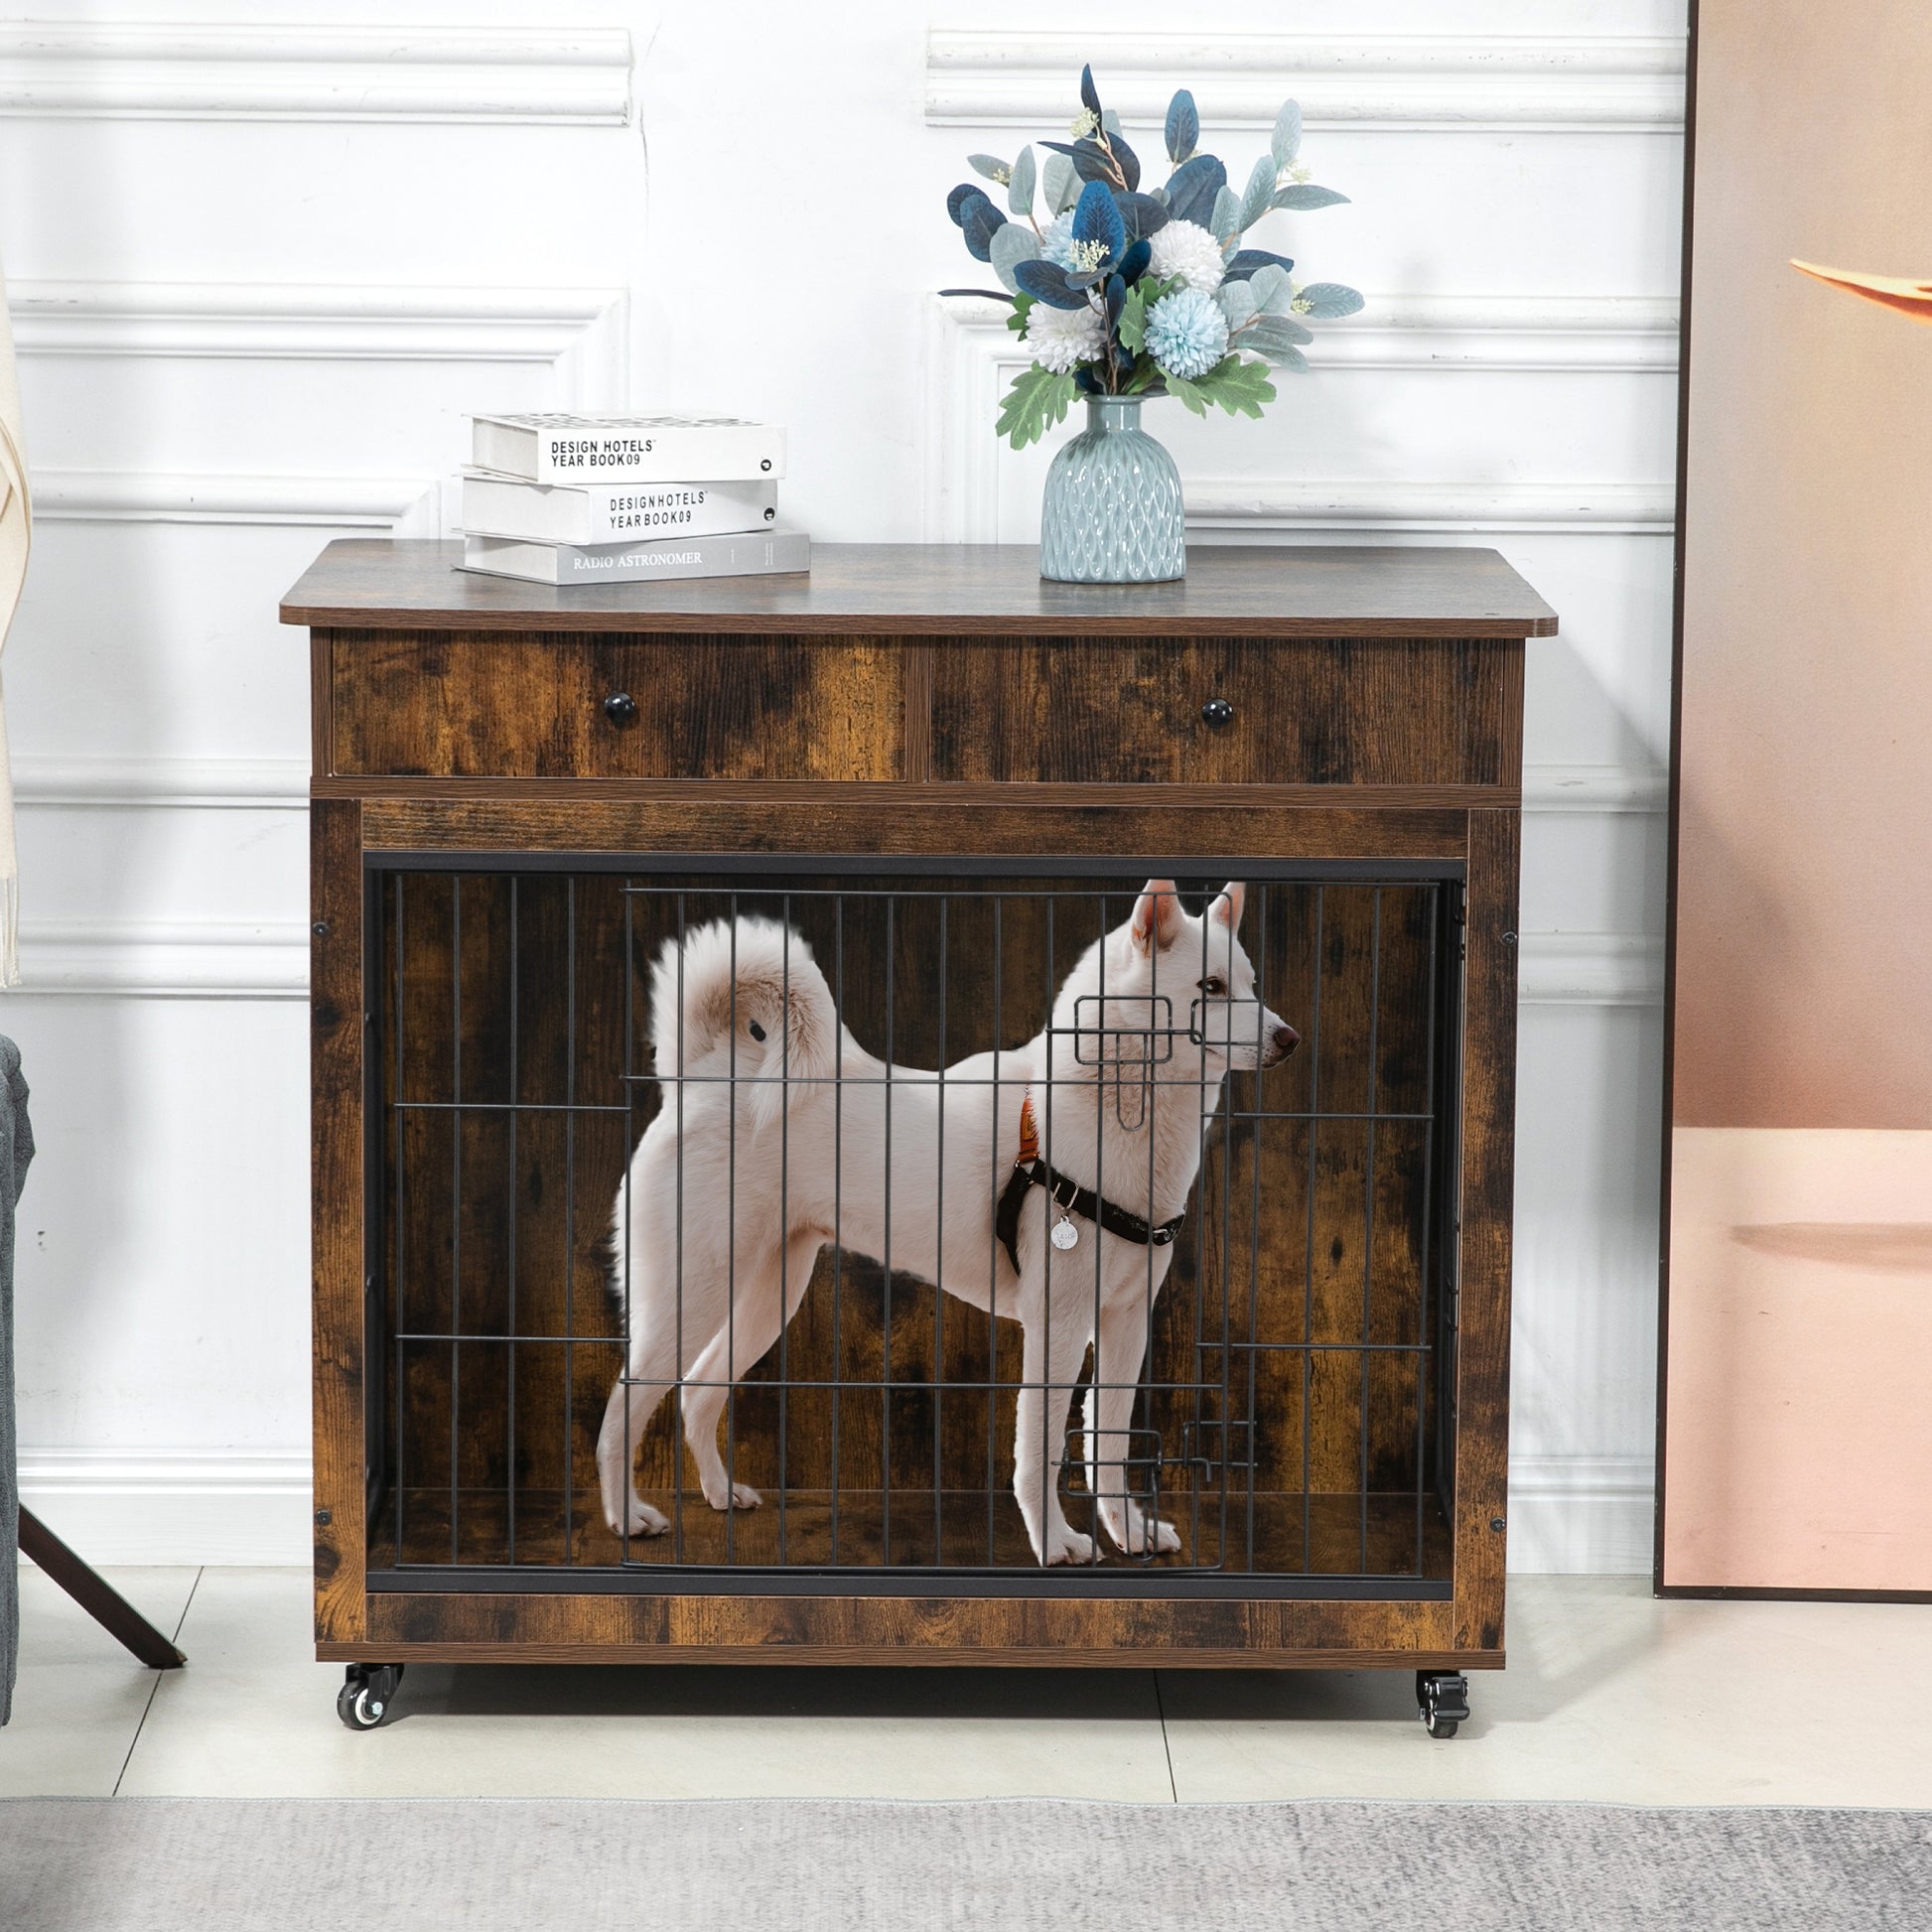 38.4" Wooden Dog Crate End Table with 2 Drawers - Ukerr Home